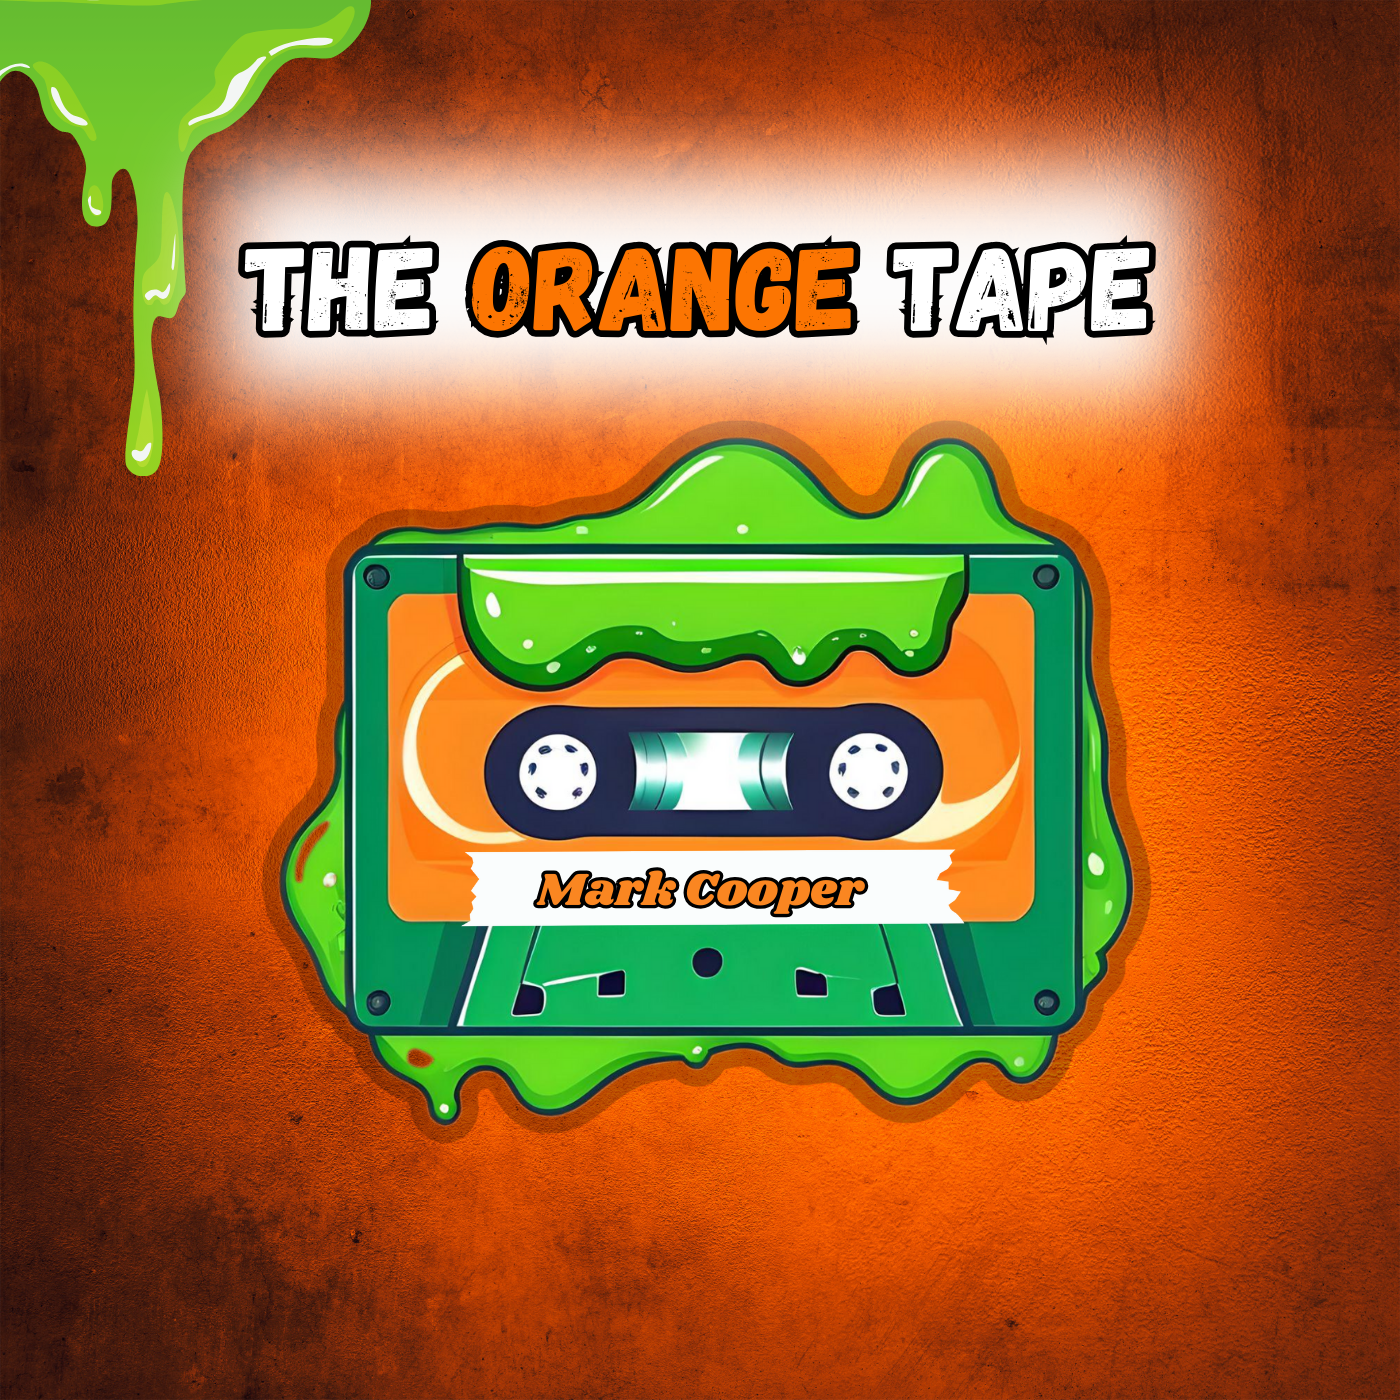 DJ Mark Cooper: The Orange Tape Album, Friday and Saturday nights at the Official After Party at the Lansing Shuffle, with special guest DJ Fluff313